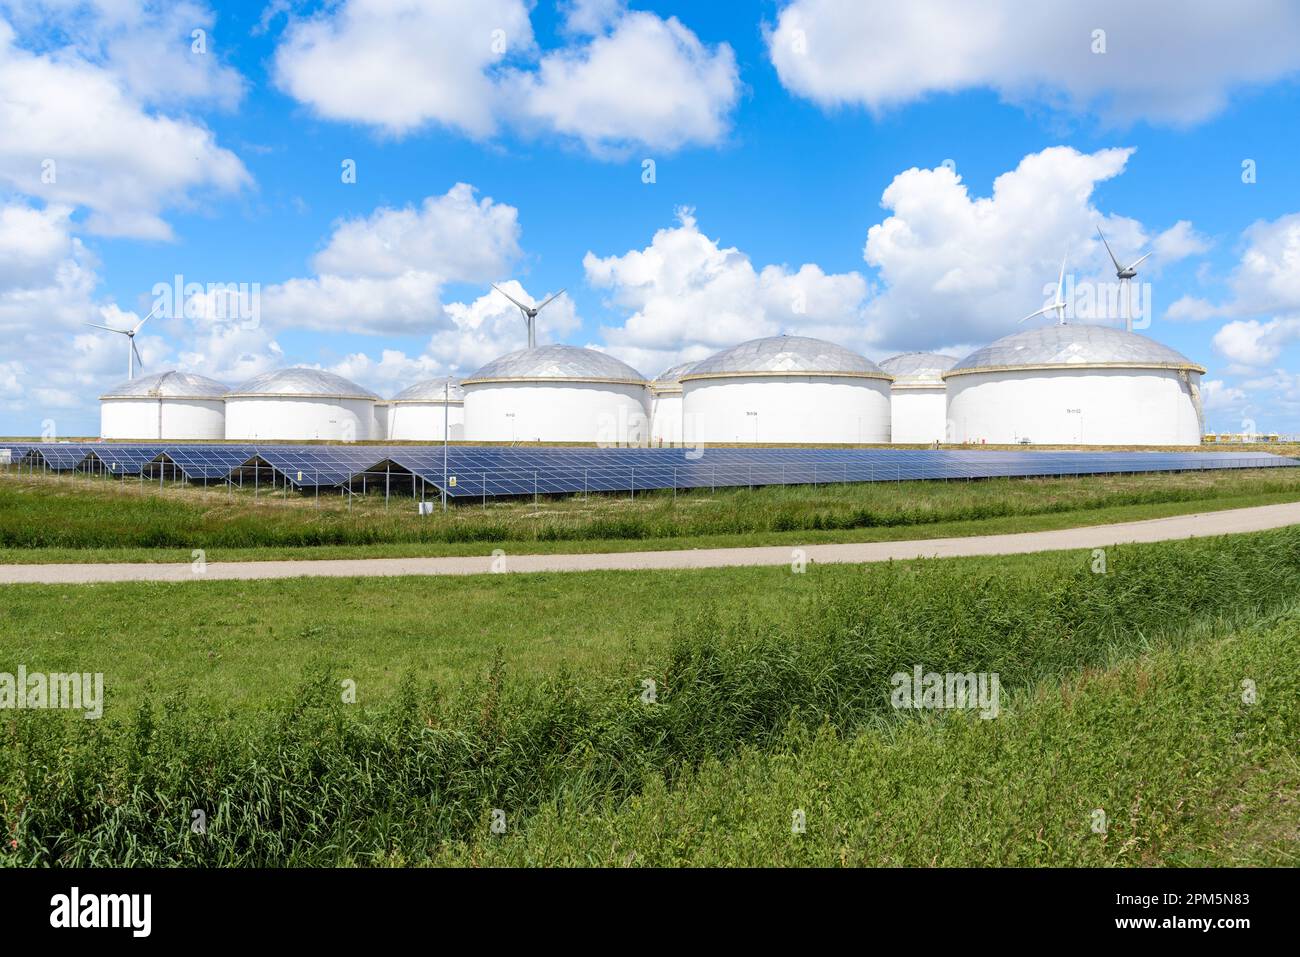 Row of solar panels in front of a group of fuel storage tanks in a business park on a sunny summer day. Wind turbines are visible in background. Stock Photo